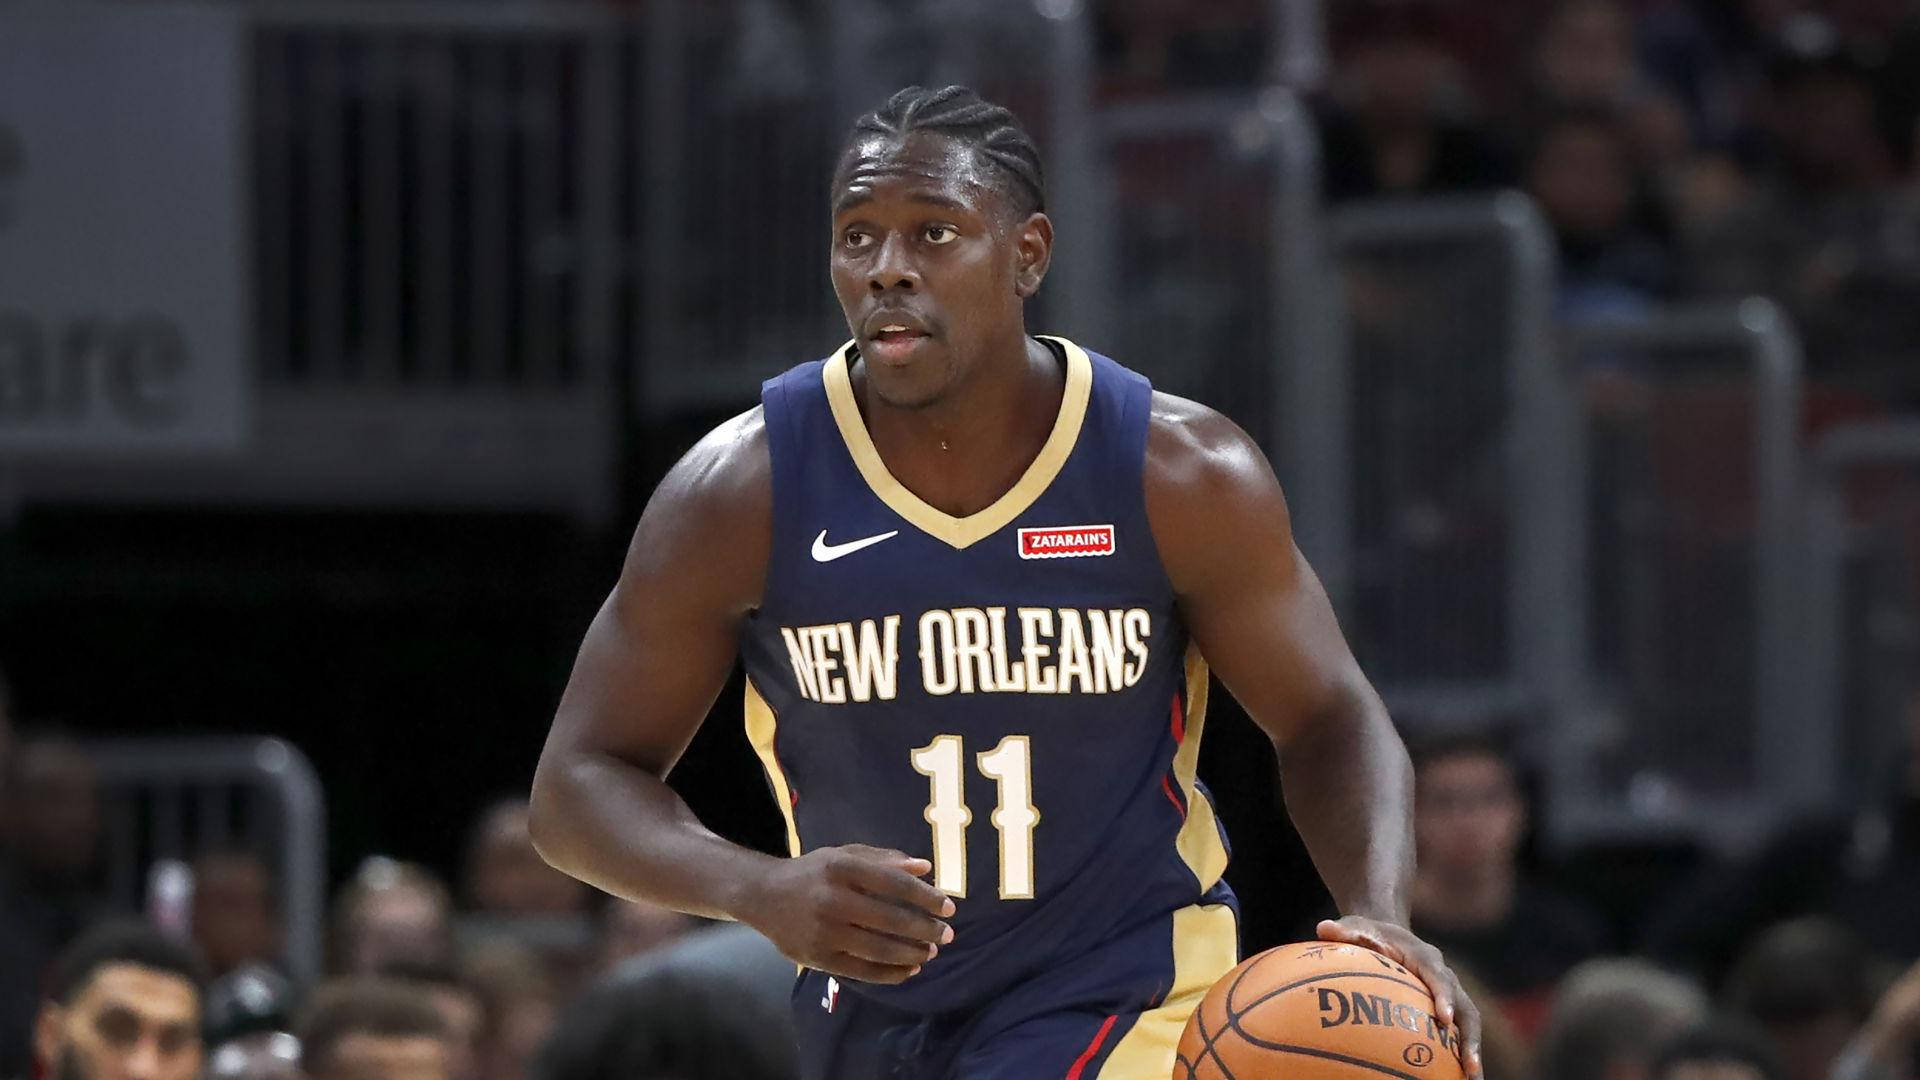 Top 999+ Jrue Holiday Wallpapers Full HD, 4K Free to Use